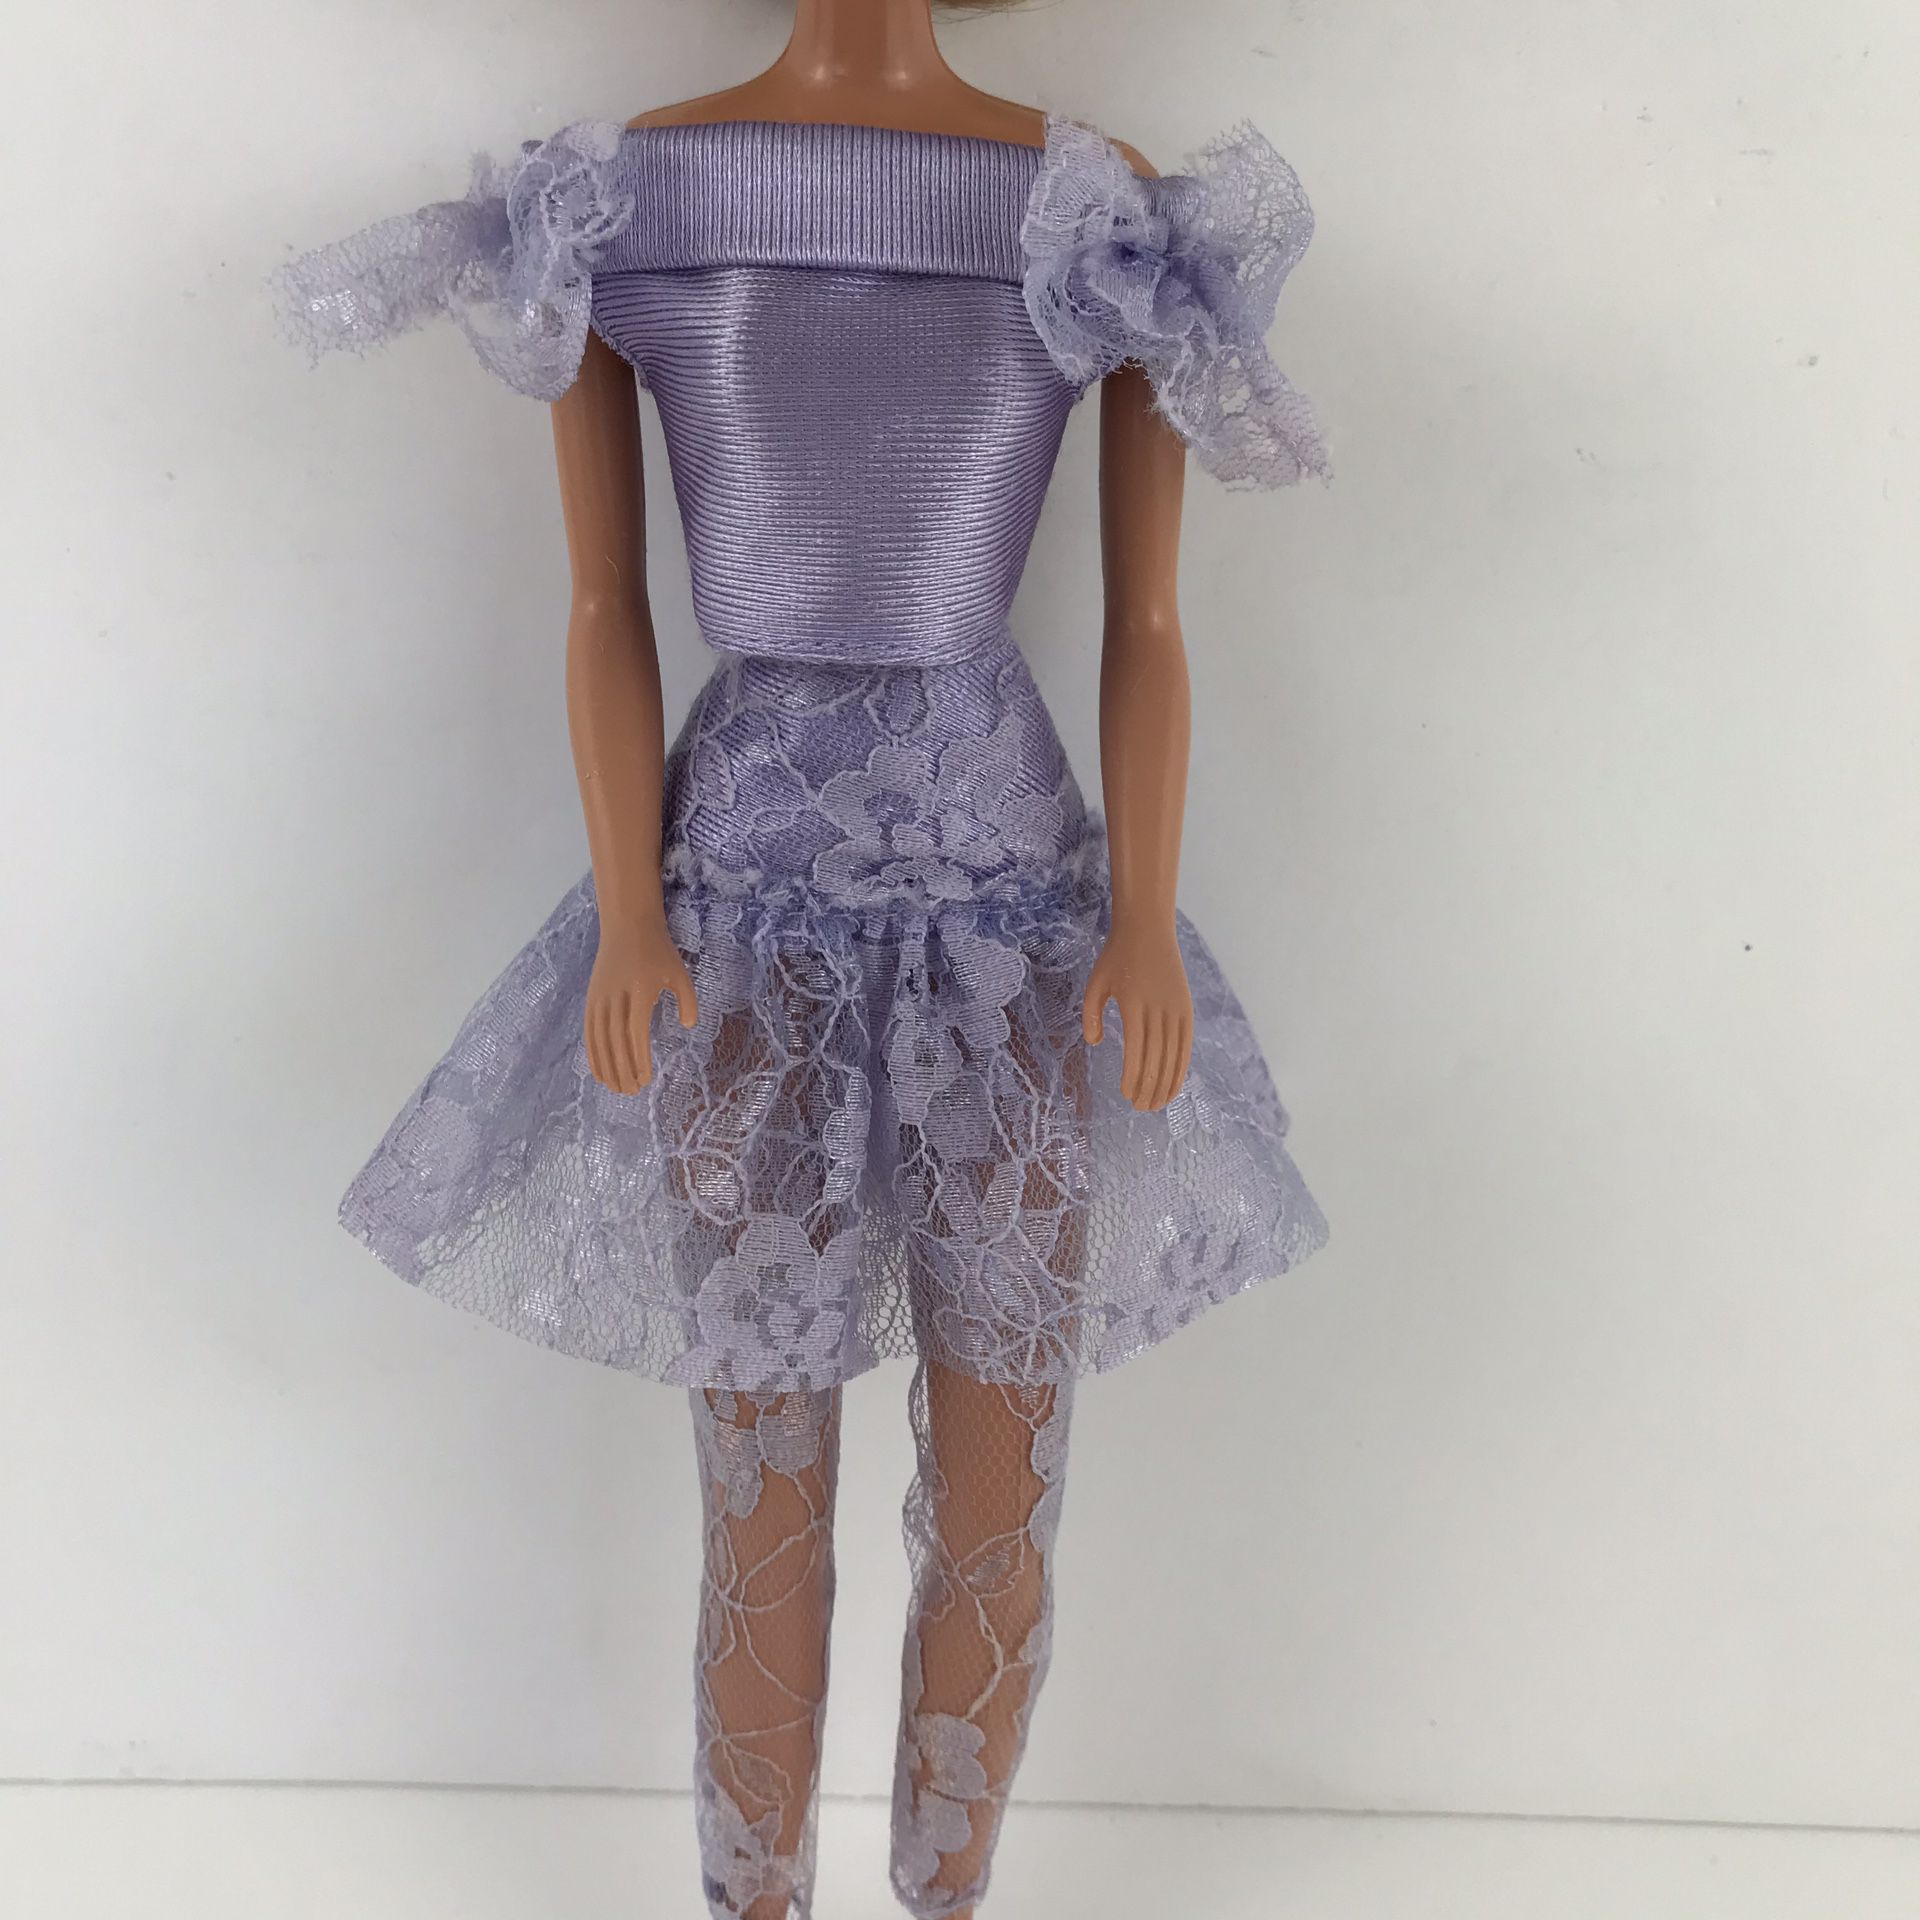 Barbie Doll Dinner Dat Fashions Clothes 1990s Vtg